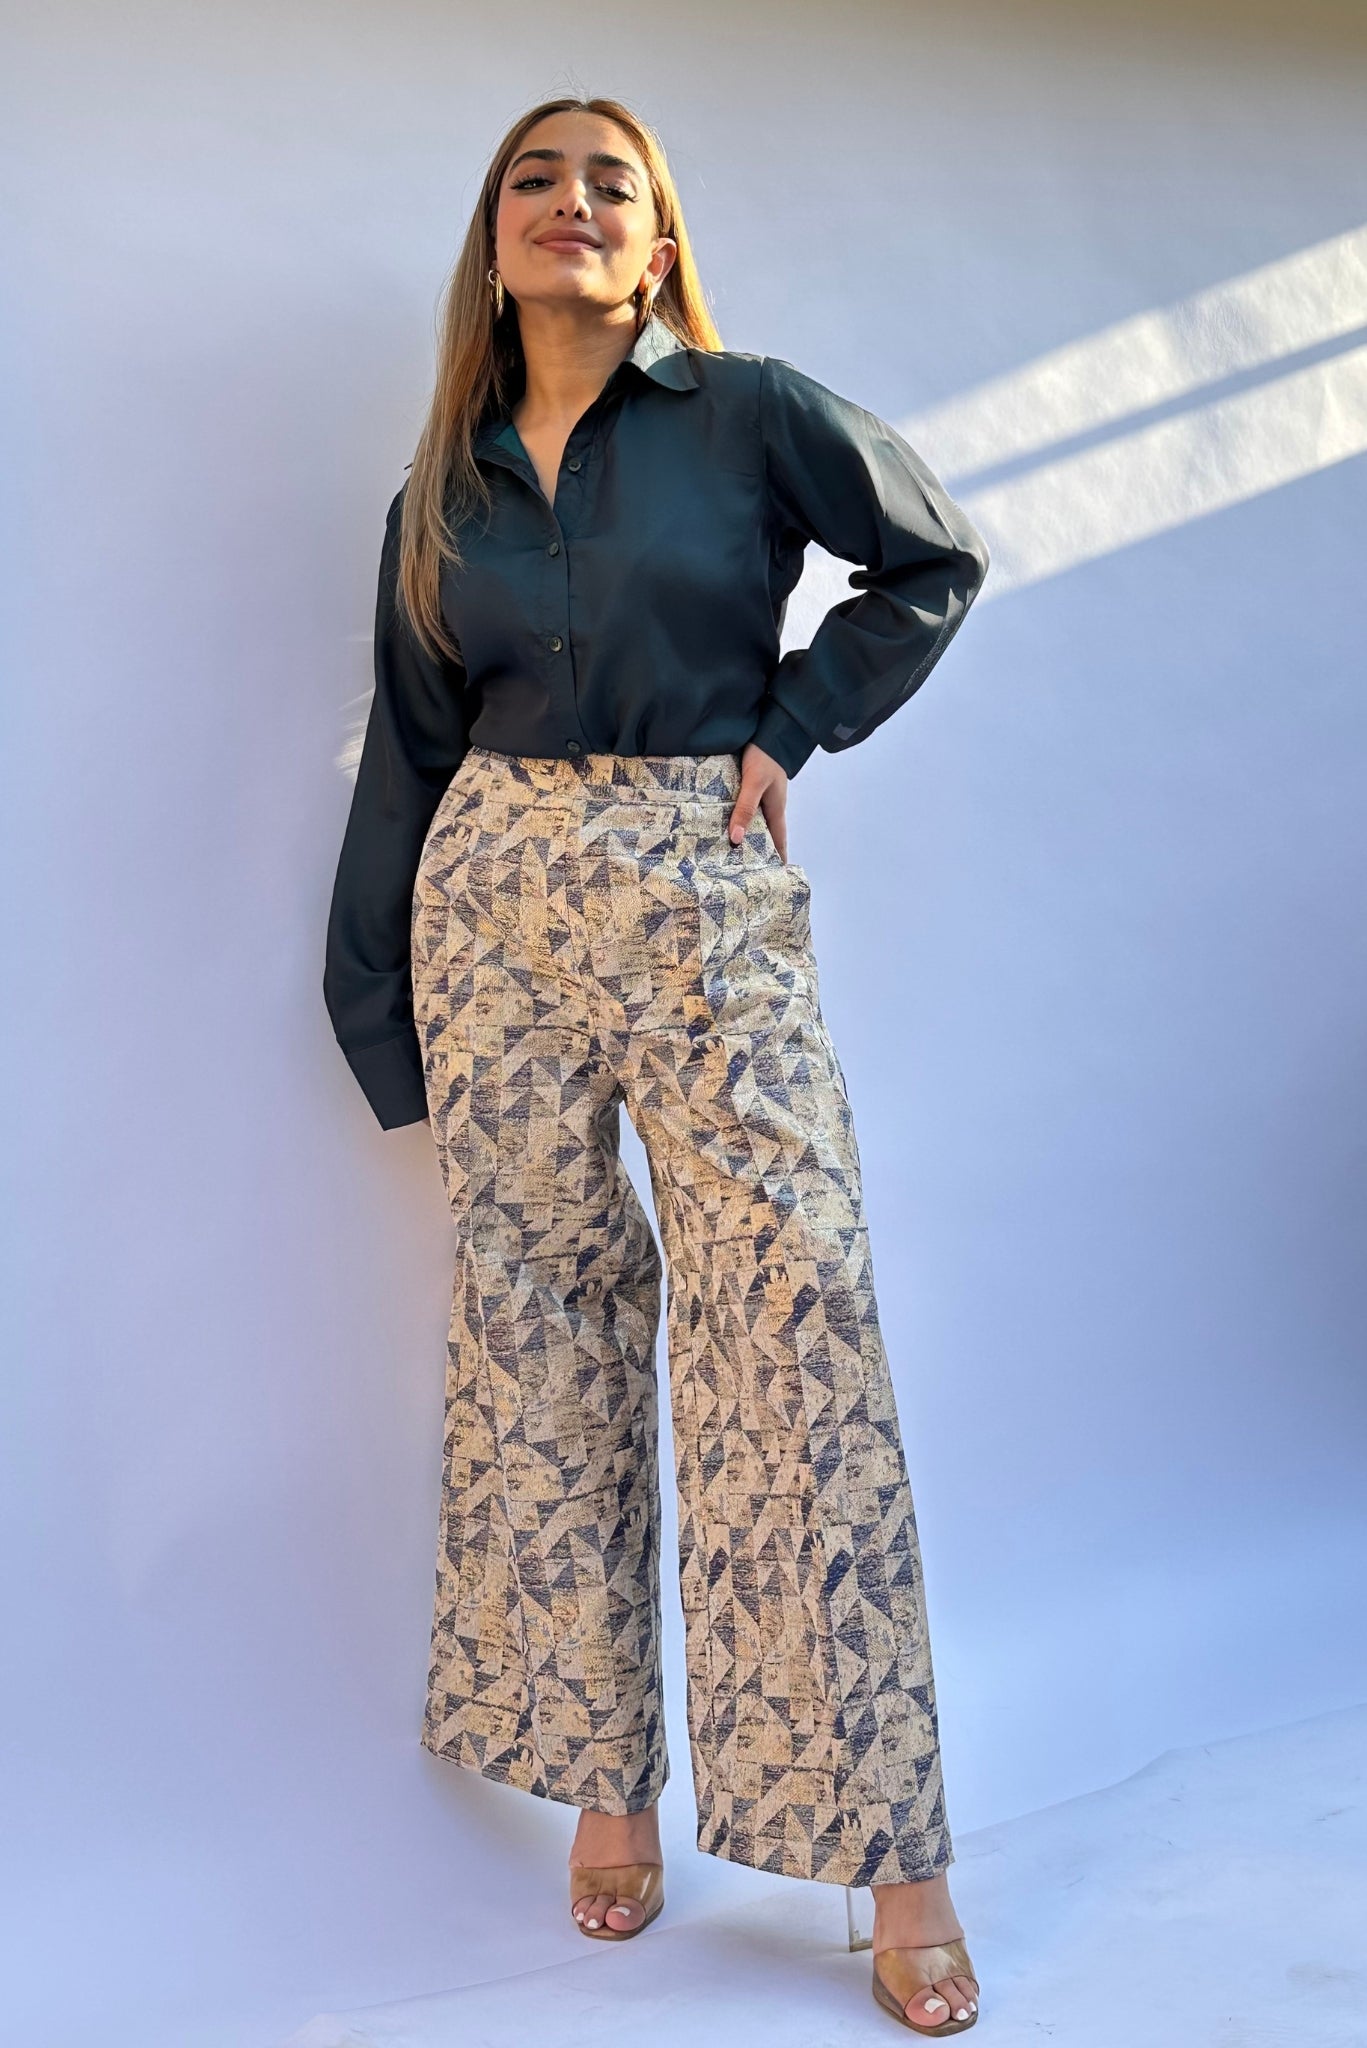 10 latest palazzo pants styles in Nigeria (with prices) - Legit.ng